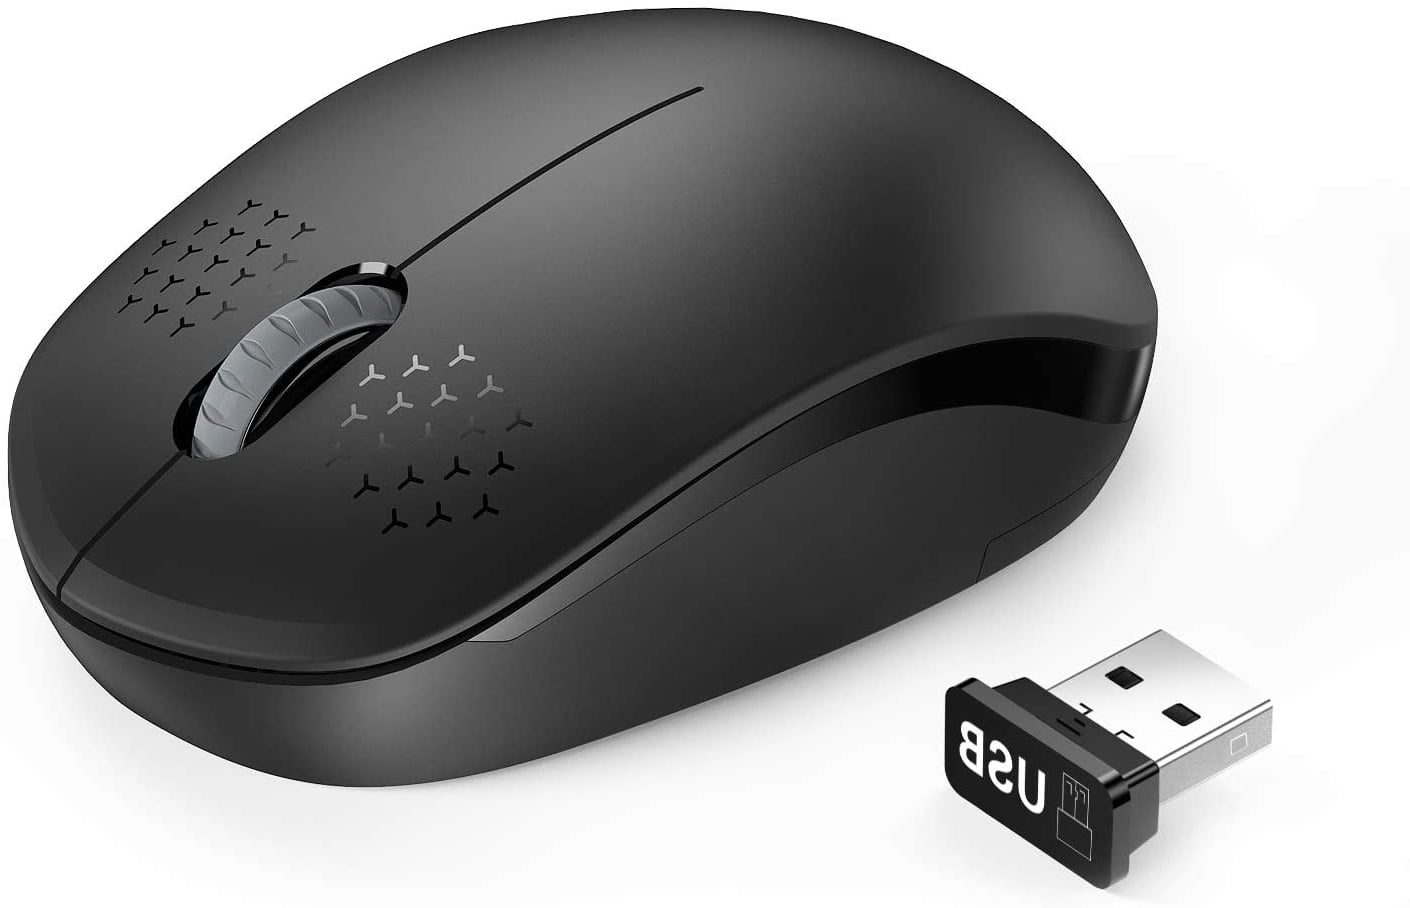 Bourgeon Vernauwd maak je geïrriteerd Wireless Mouse - 2.4G Cordless Mice with USB Nano Receiver Computer Mouse  with Noiseless Click for Laptop, PC, Tablet, Computer, and Mac - Black -  Walmart.com